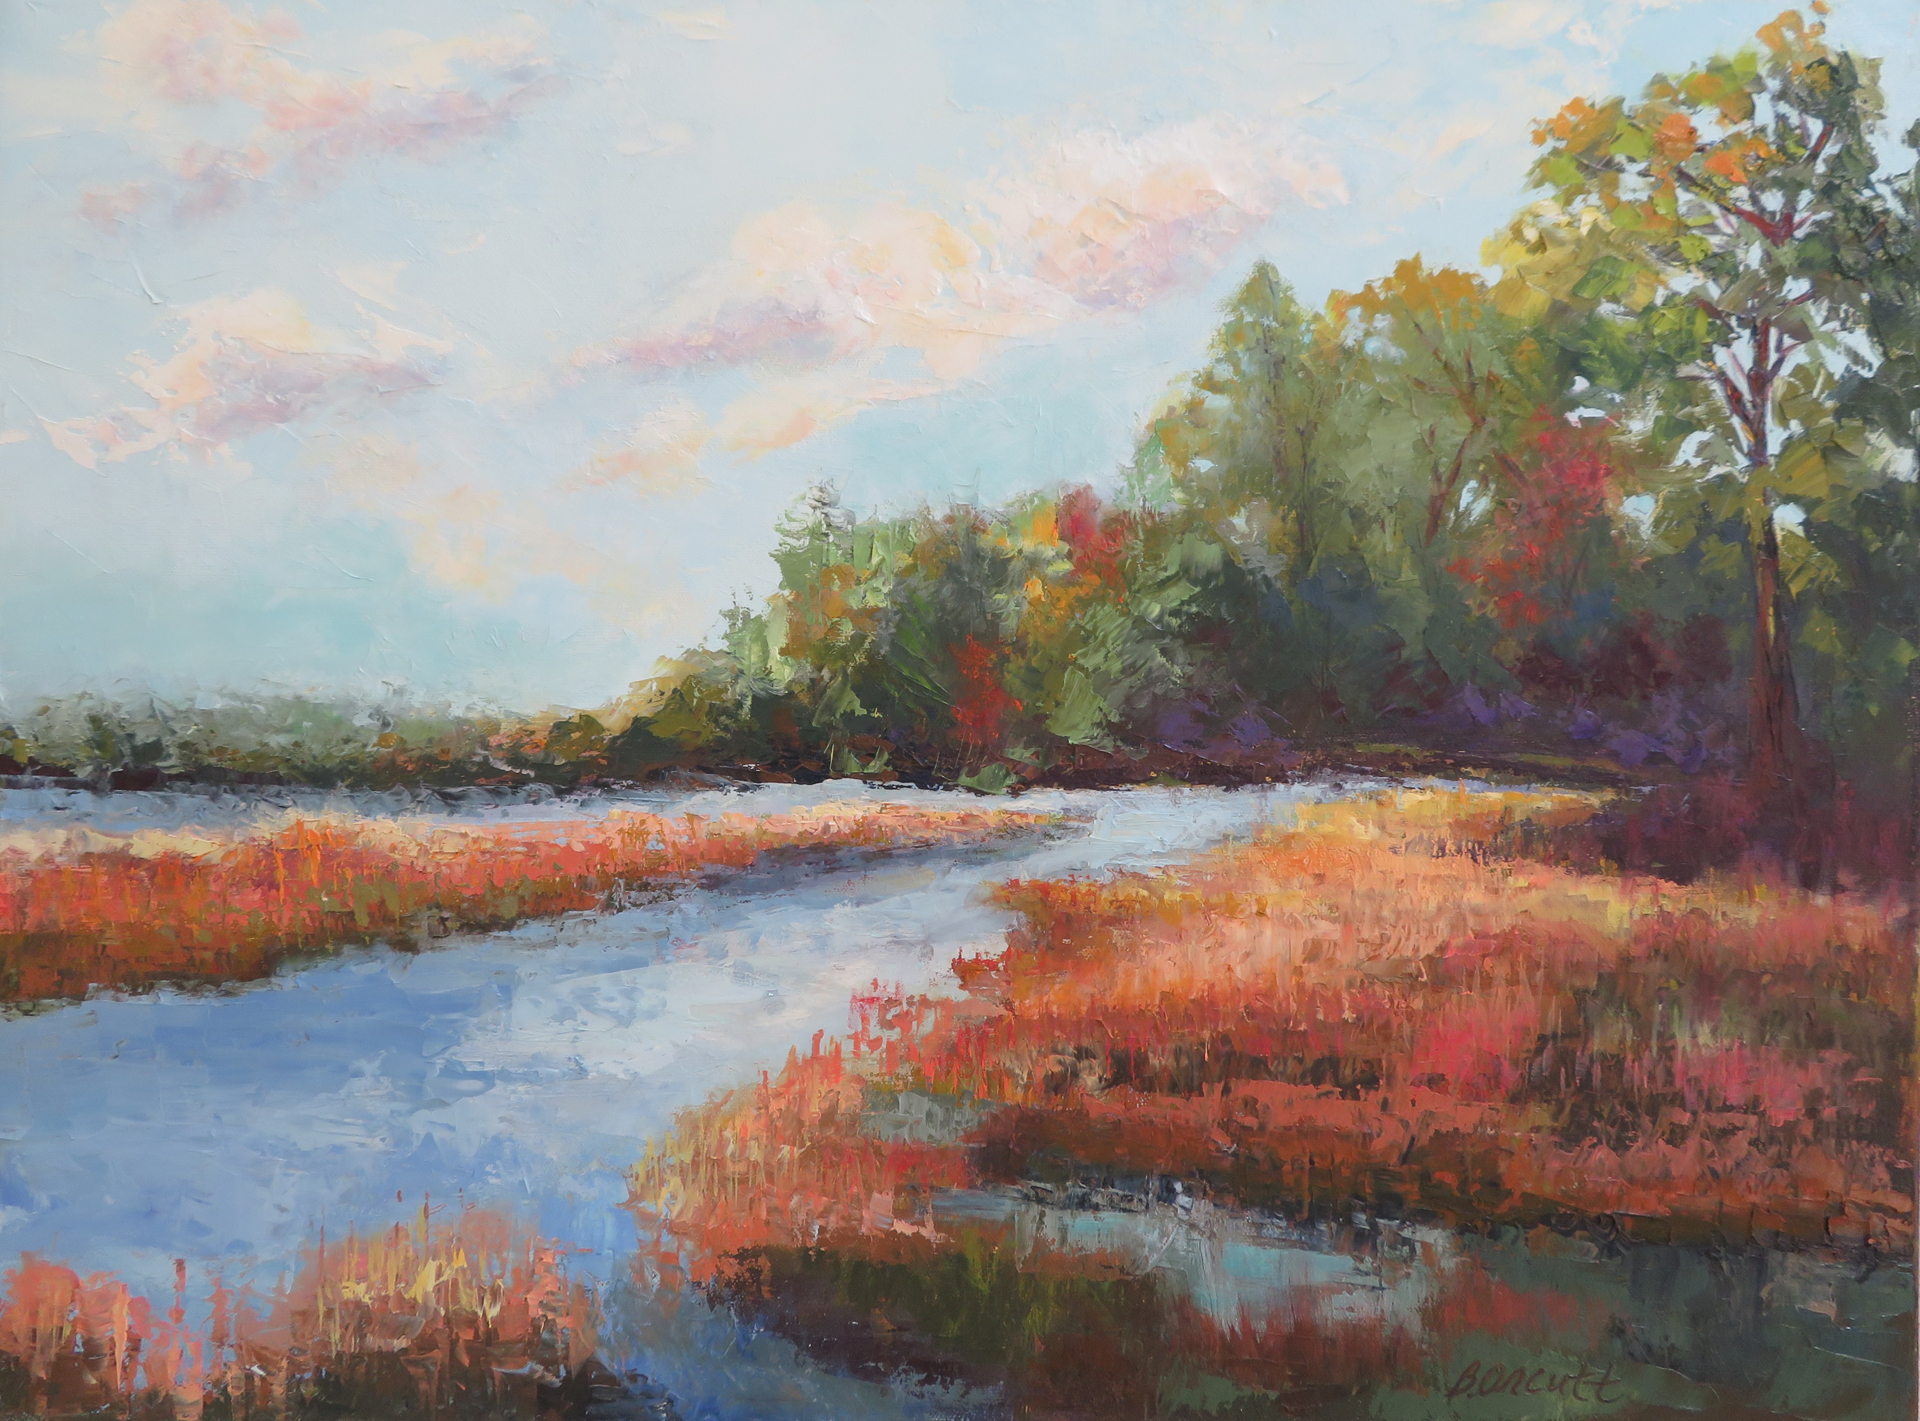 High Tide in the Lowcountry by Brenda Orcutt